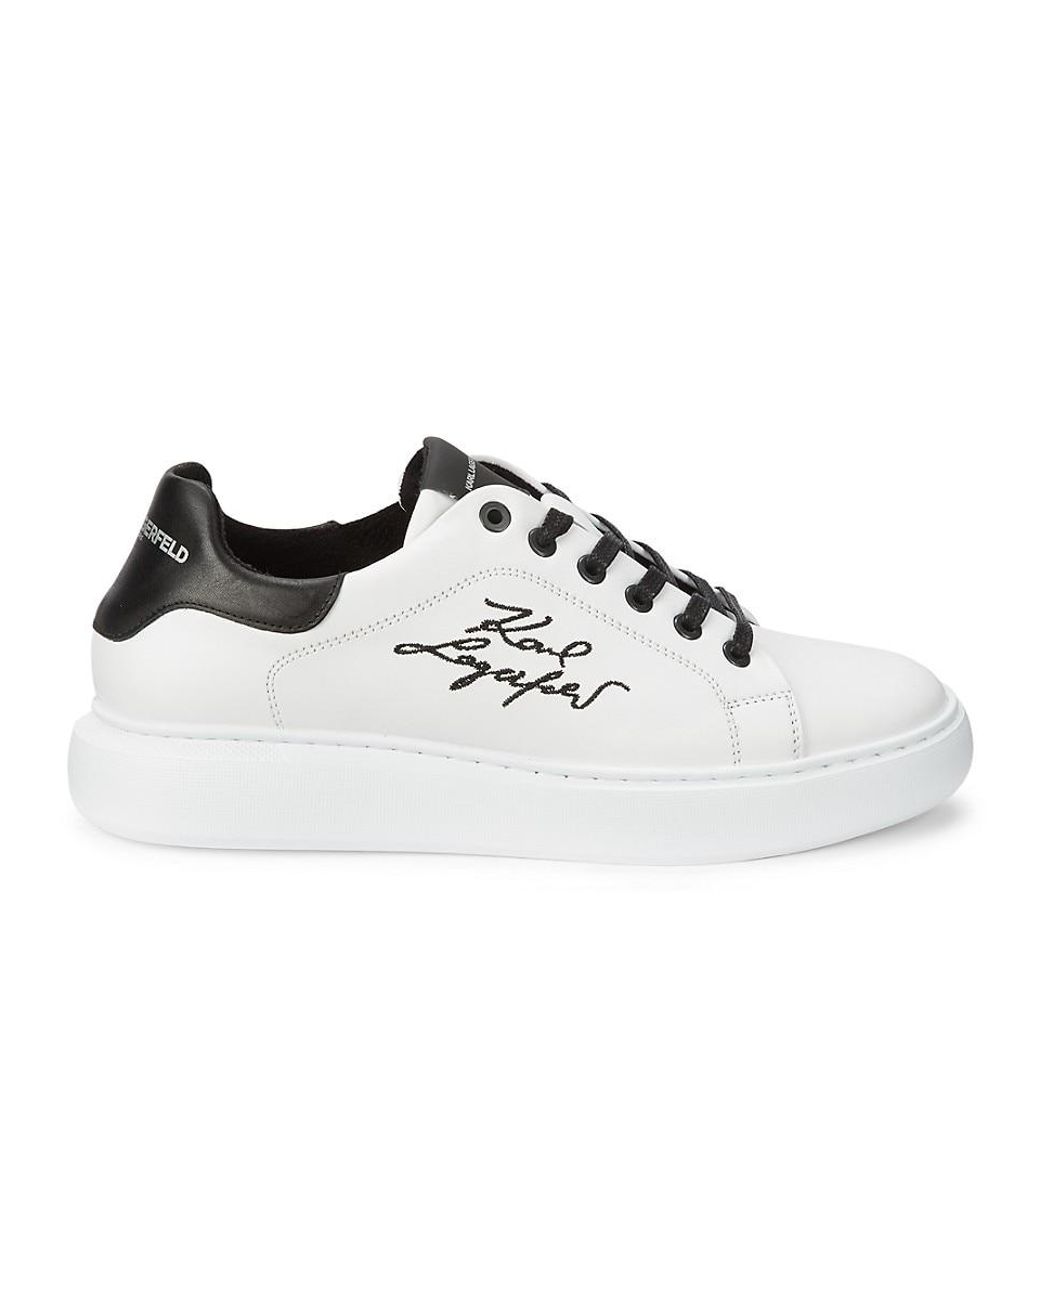 Karl Lagerfeld Signature Leather Sneakers in White (Black) | Lyst